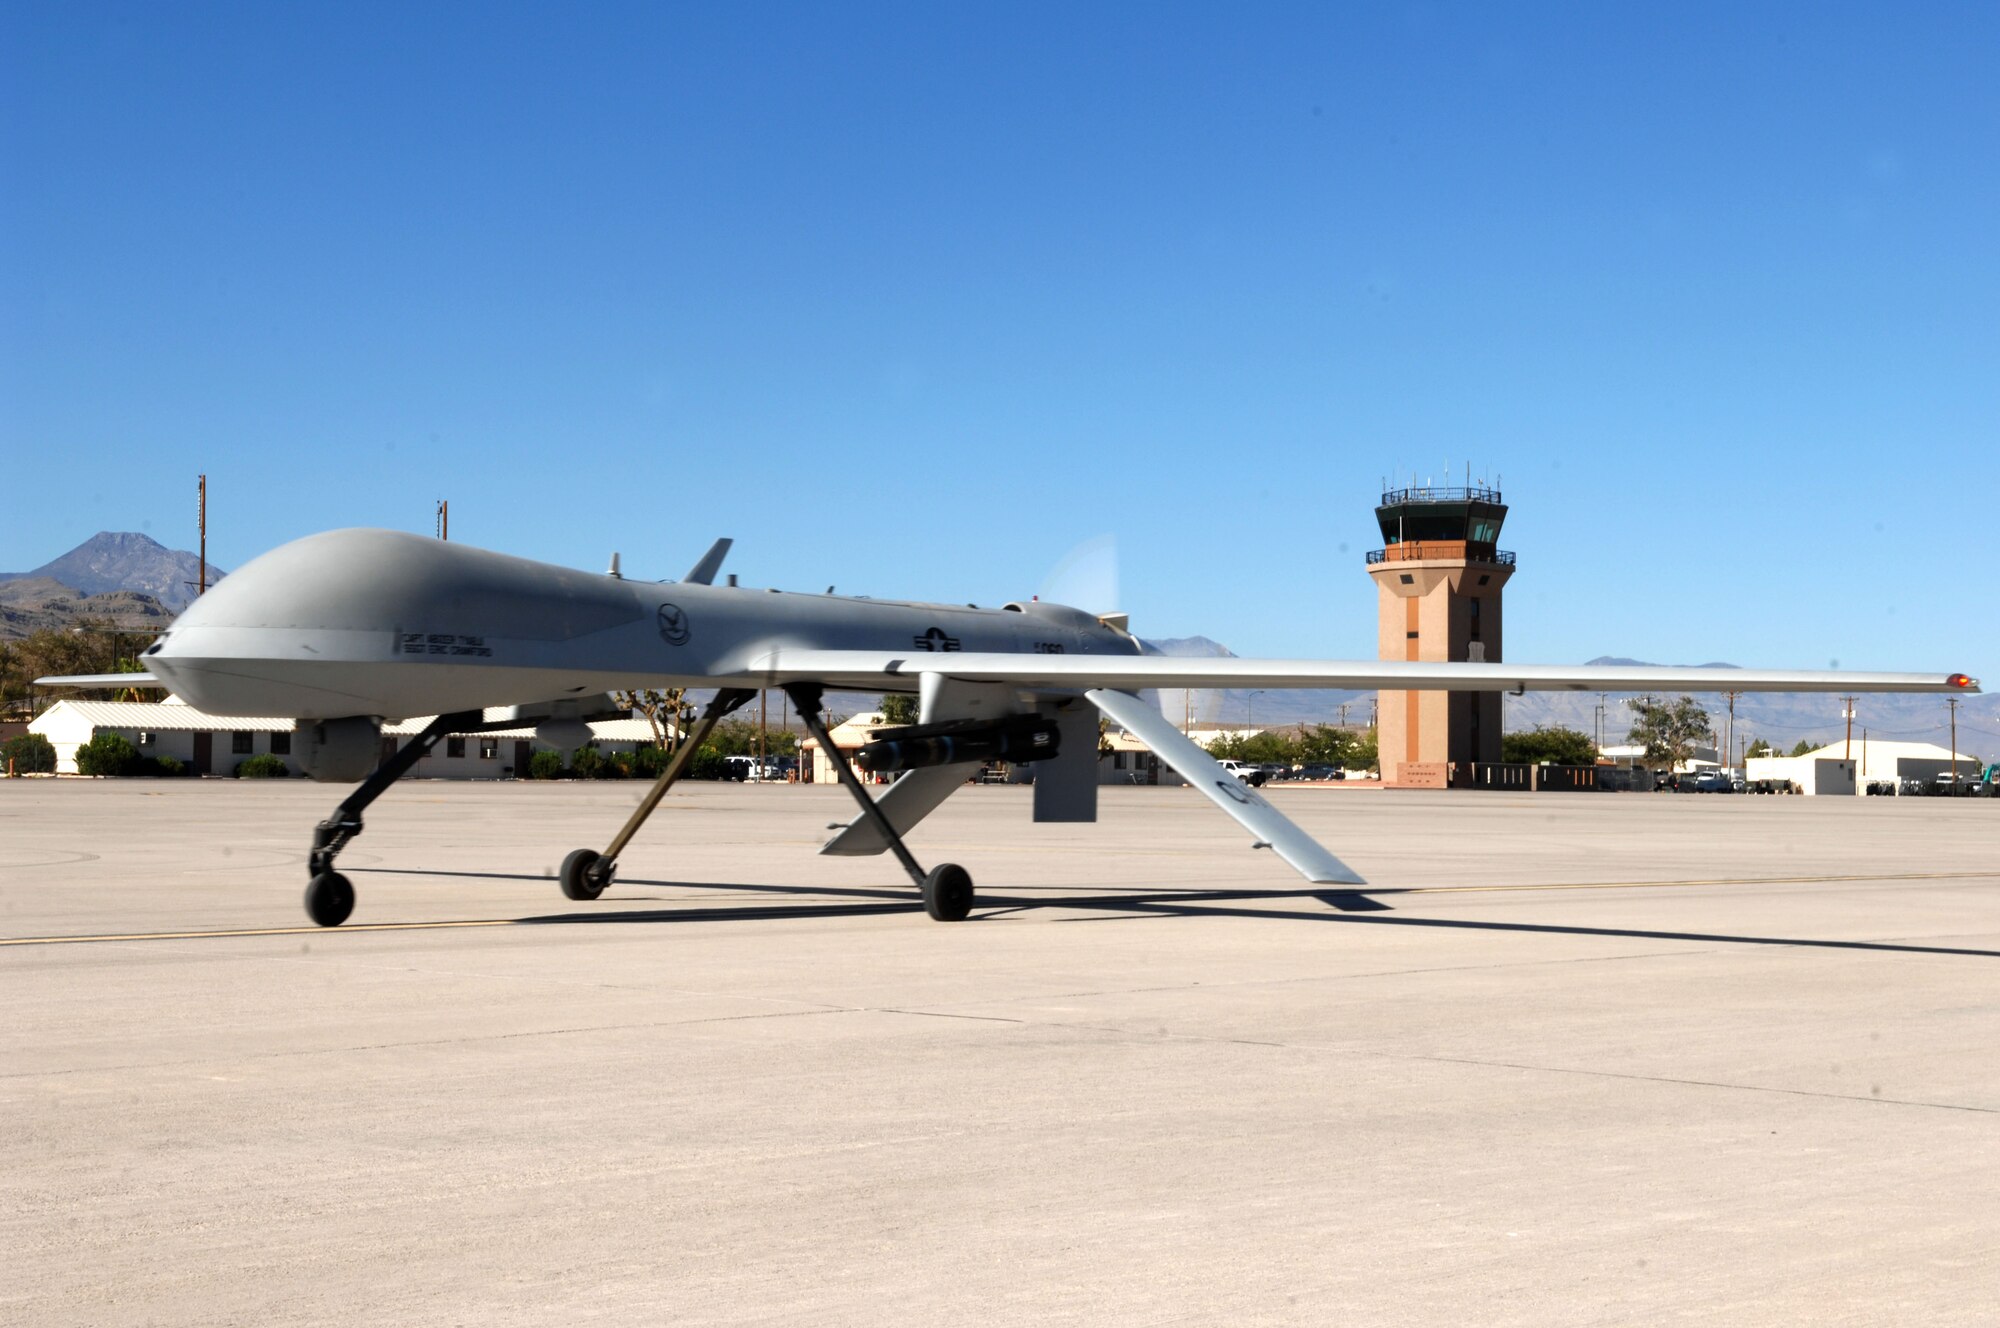 An MQ-1 Predator unmanned aircraft system taxies down a runway at Creech AFB, Nev., Aug. 13. The MQ-1 Predator recently passed 400,000 flight hours during missions over Iraq and Afghanistan. (U.S. Air Force photo by Senior Airman Larry Reid)